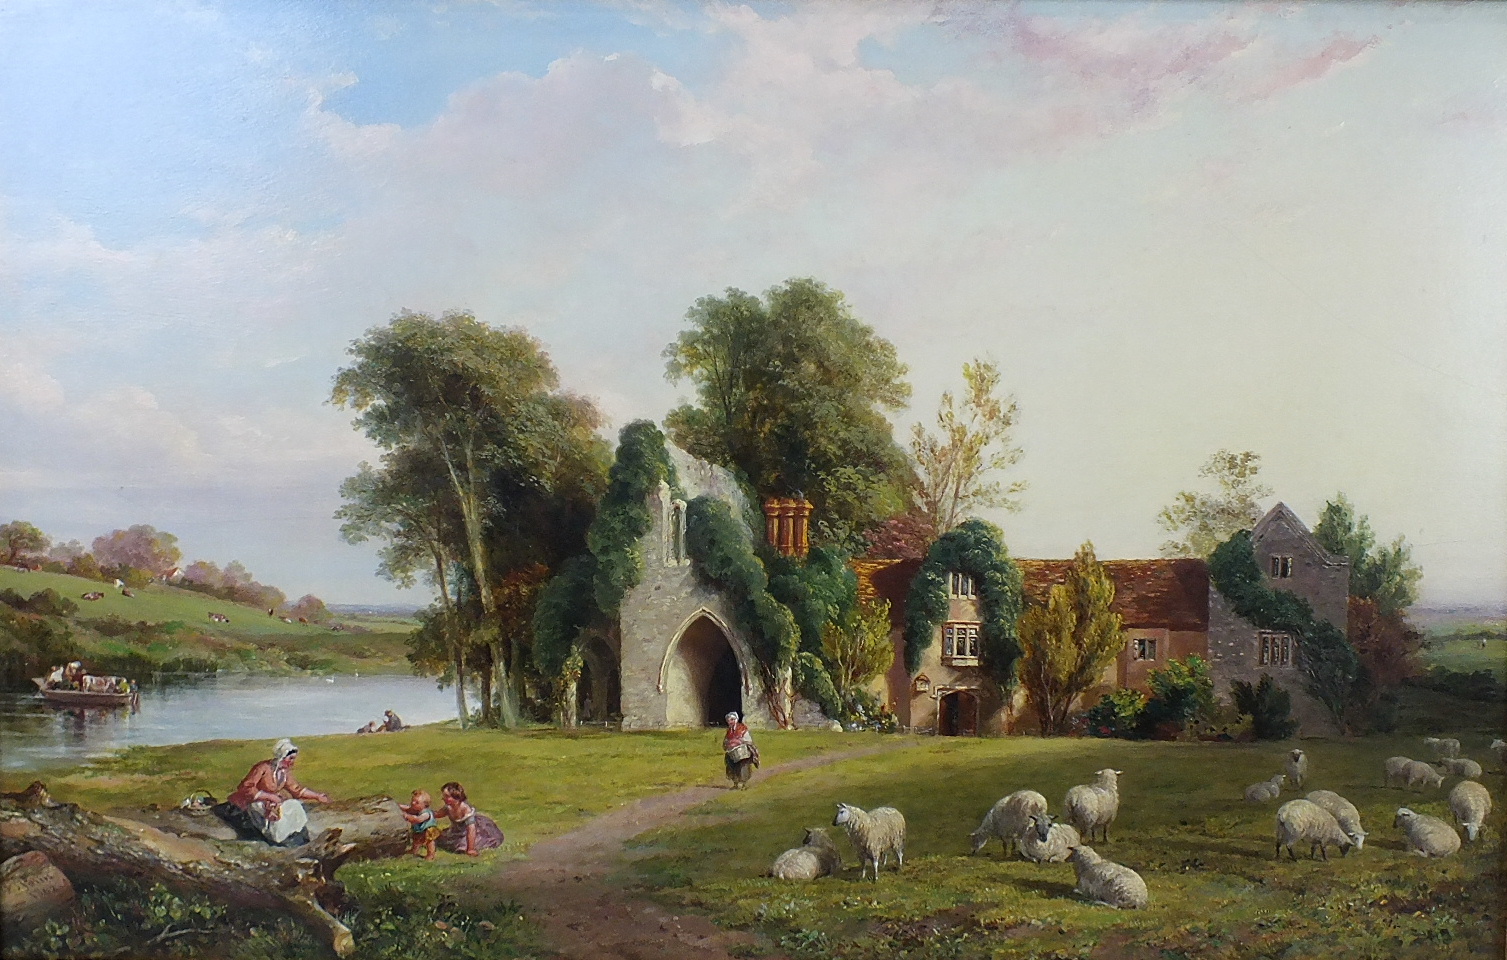 Edmund Thomas Parris (1793-1873) MEDMENHAM ABBEY, DANESFIELD, MARLOW, SHEEP AND FIGURES IN FRONT